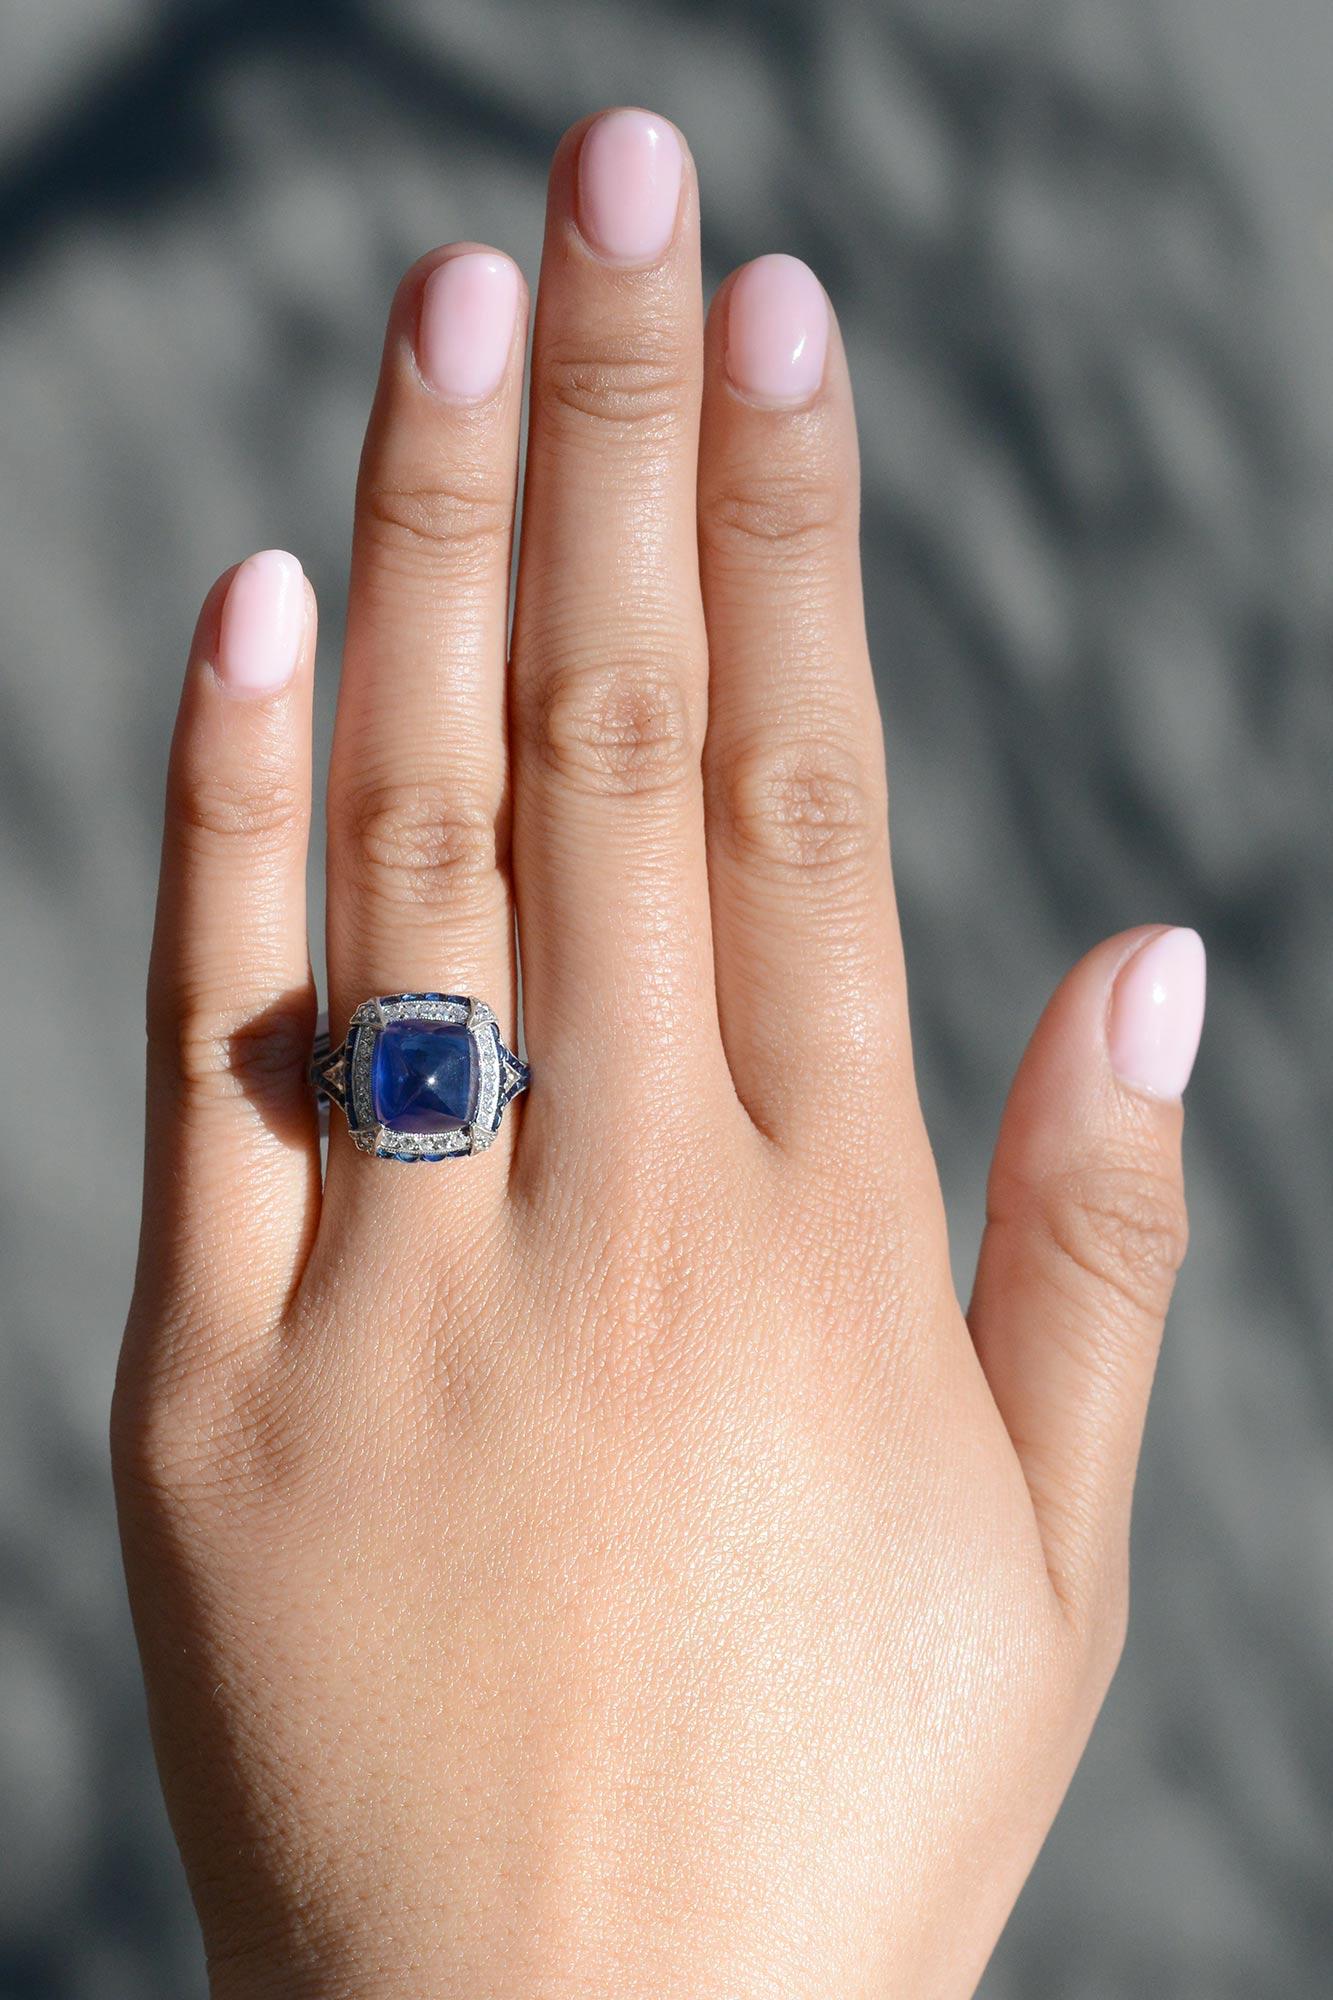 A jaw-dropping sugar loaf sapphire is the star of the show in this Art Deco style ring. This unique cut produces a vivacious, velvety blue color that pops and is named for the famed Brazilian mountain. The double halo of diamonds and buff top